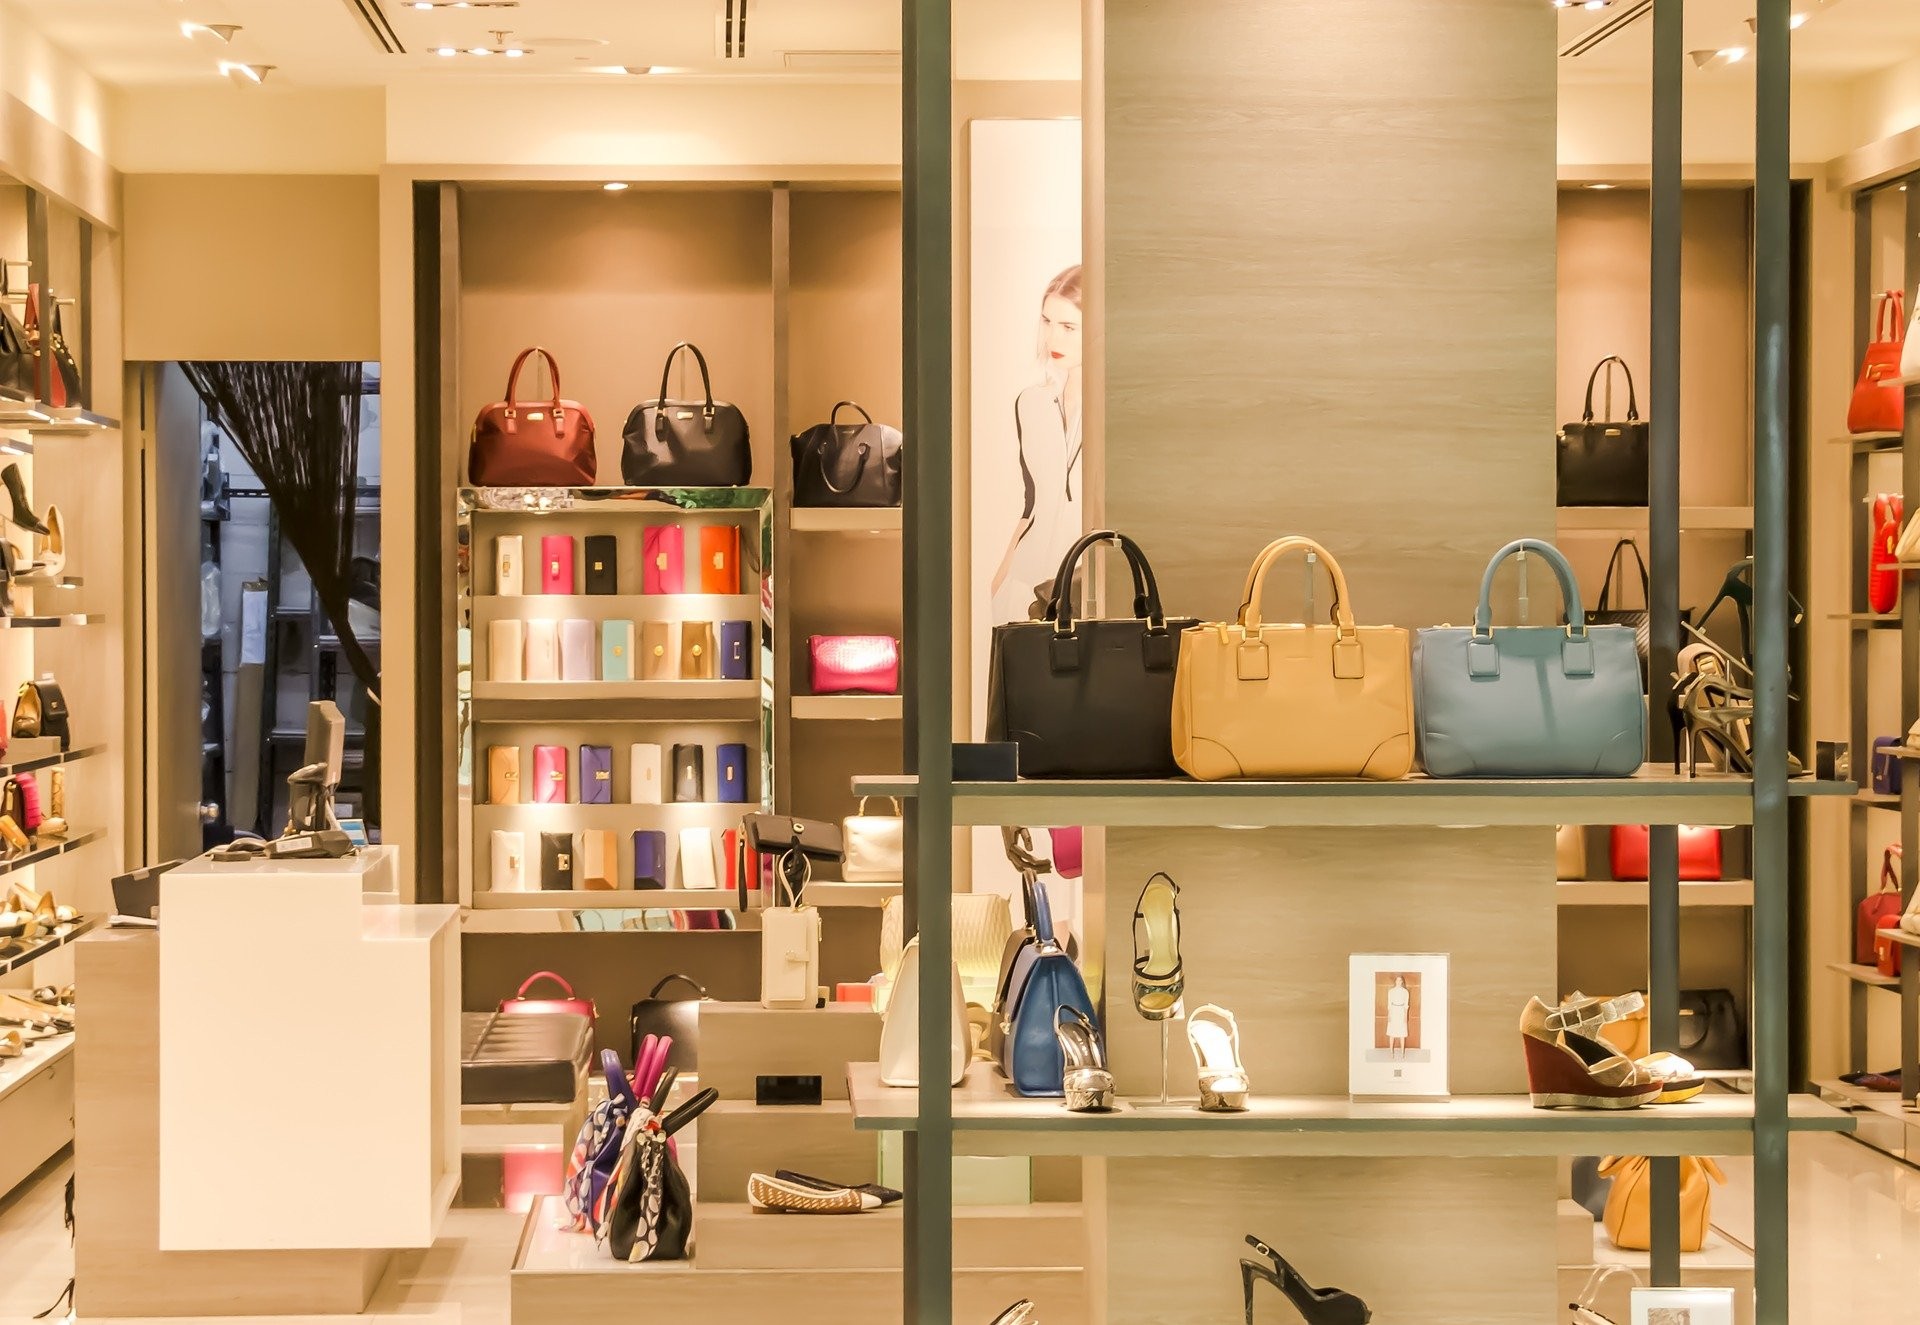 Image: A carefully designed store displaying a luxury brand’s products and image